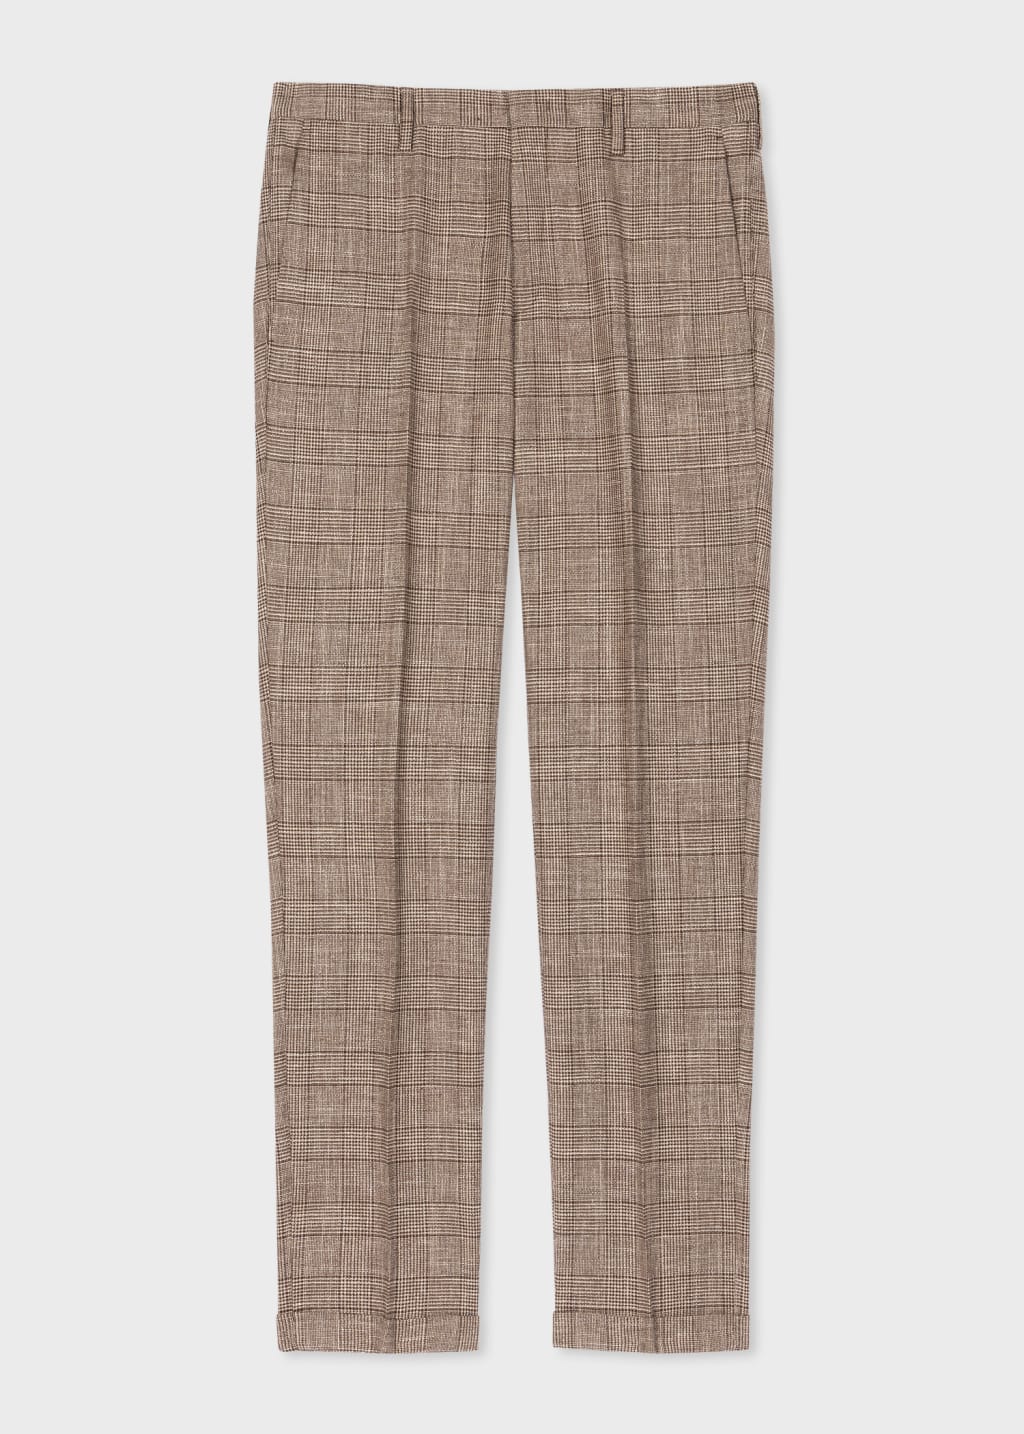 Product View - Slim-Fit Brown Houndstooth Check Wool-Linen Trousers by Paul Smith